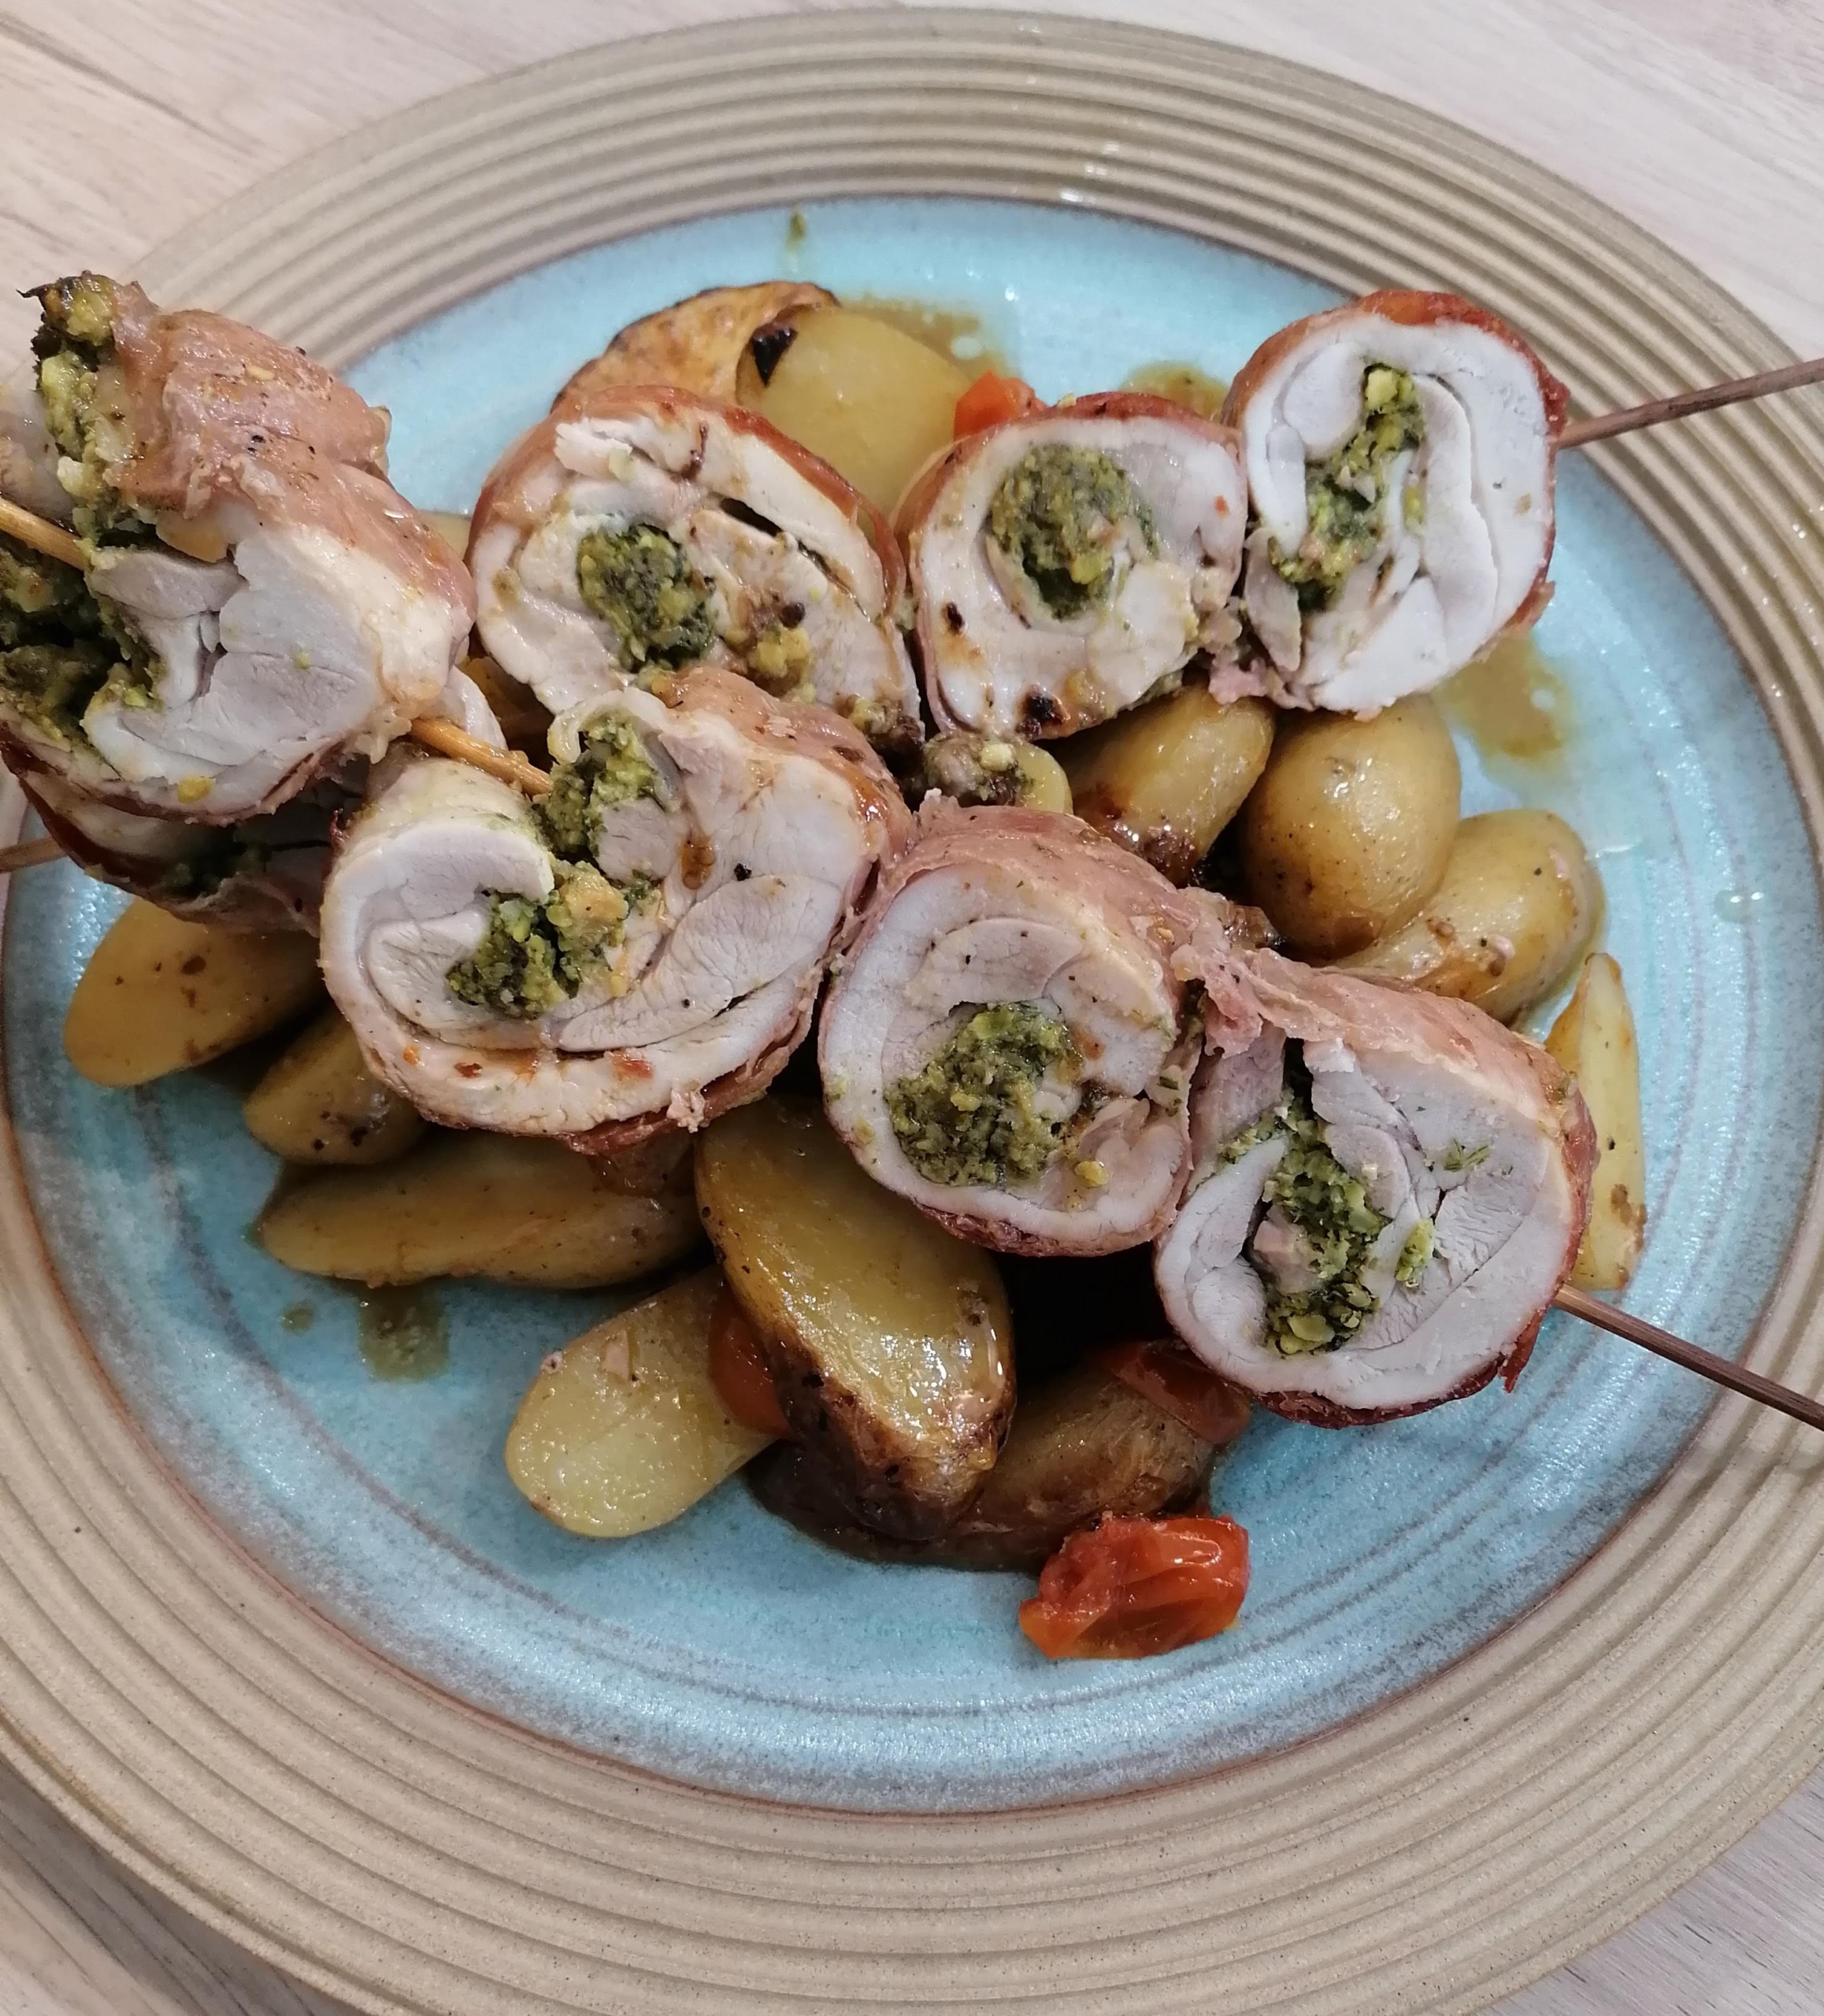 an image of chicken skewers stuffed with pistachio nuts & herbs, served on a bed of new potatoes